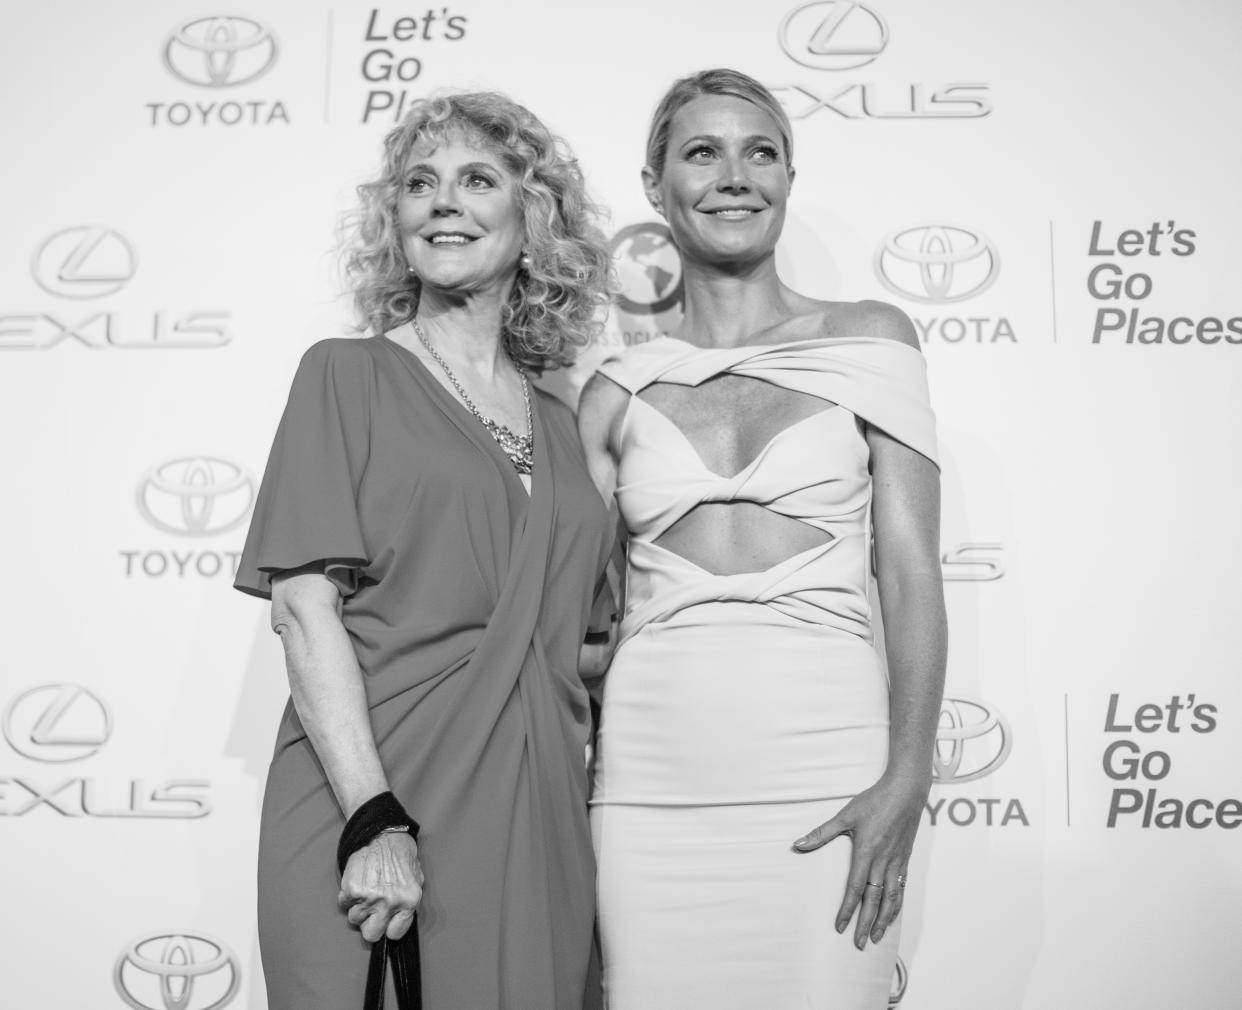 Gwyneth Paltrow and Blythe Danner attend the 25th annual EMA Awards presented by Toyota and Lexus and hosted by the Environmental Media Association at Warner Bros. Studios on October 24, 2015 in Burbank, California.  (Photo by Mark Davis/Getty Images for Environmental Media Association)